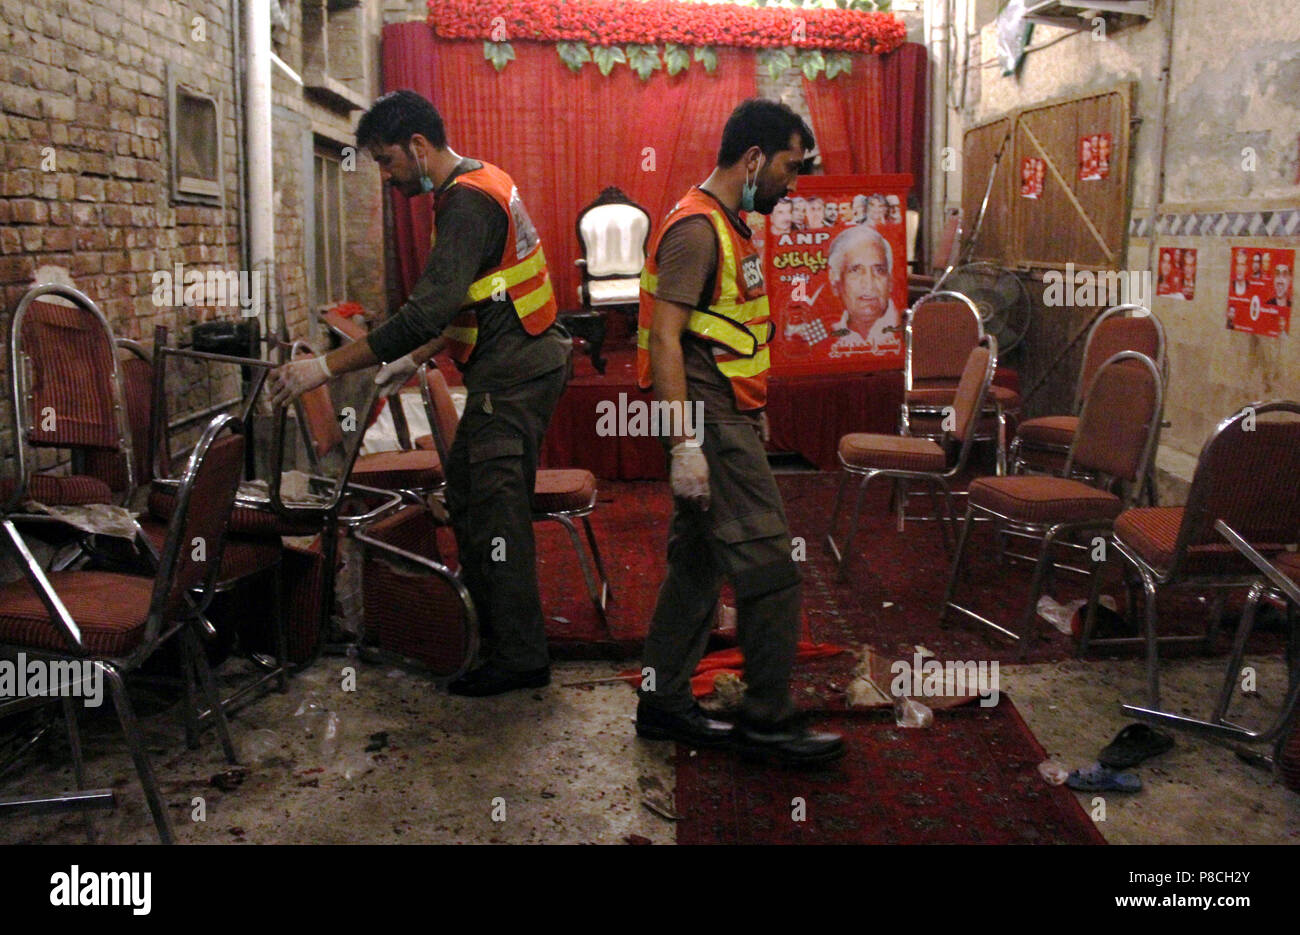 Peshawar, Pakistan. 10th July, 2018. Rescuers work at the blast site in Peshawar, northwest Pakistan, on July 10, 2018. At least 13 people were killed and dozens of others injured in a blast that hit a public gathering of a political party in Pakistan's northwest provincial capital of Peshawar on Tuesday night, local media reported. Credit: Saeed Ahmad/Xinhua/Alamy Live News Stock Photo